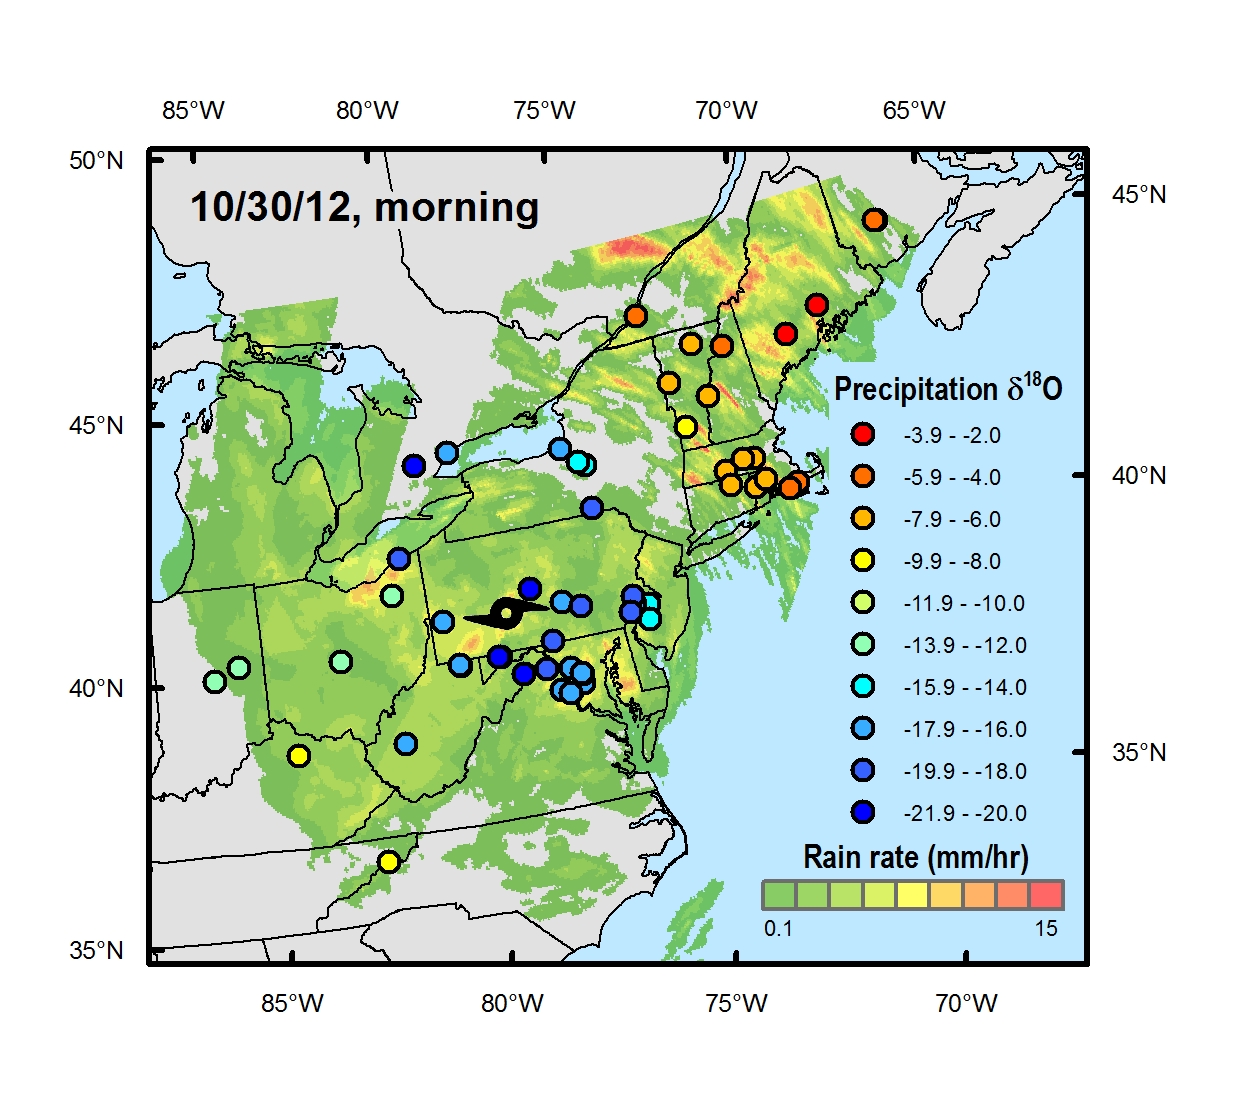 Snapshot of rainfall and oxygen-18 isotope values during landfall of Superstorm Sandy.